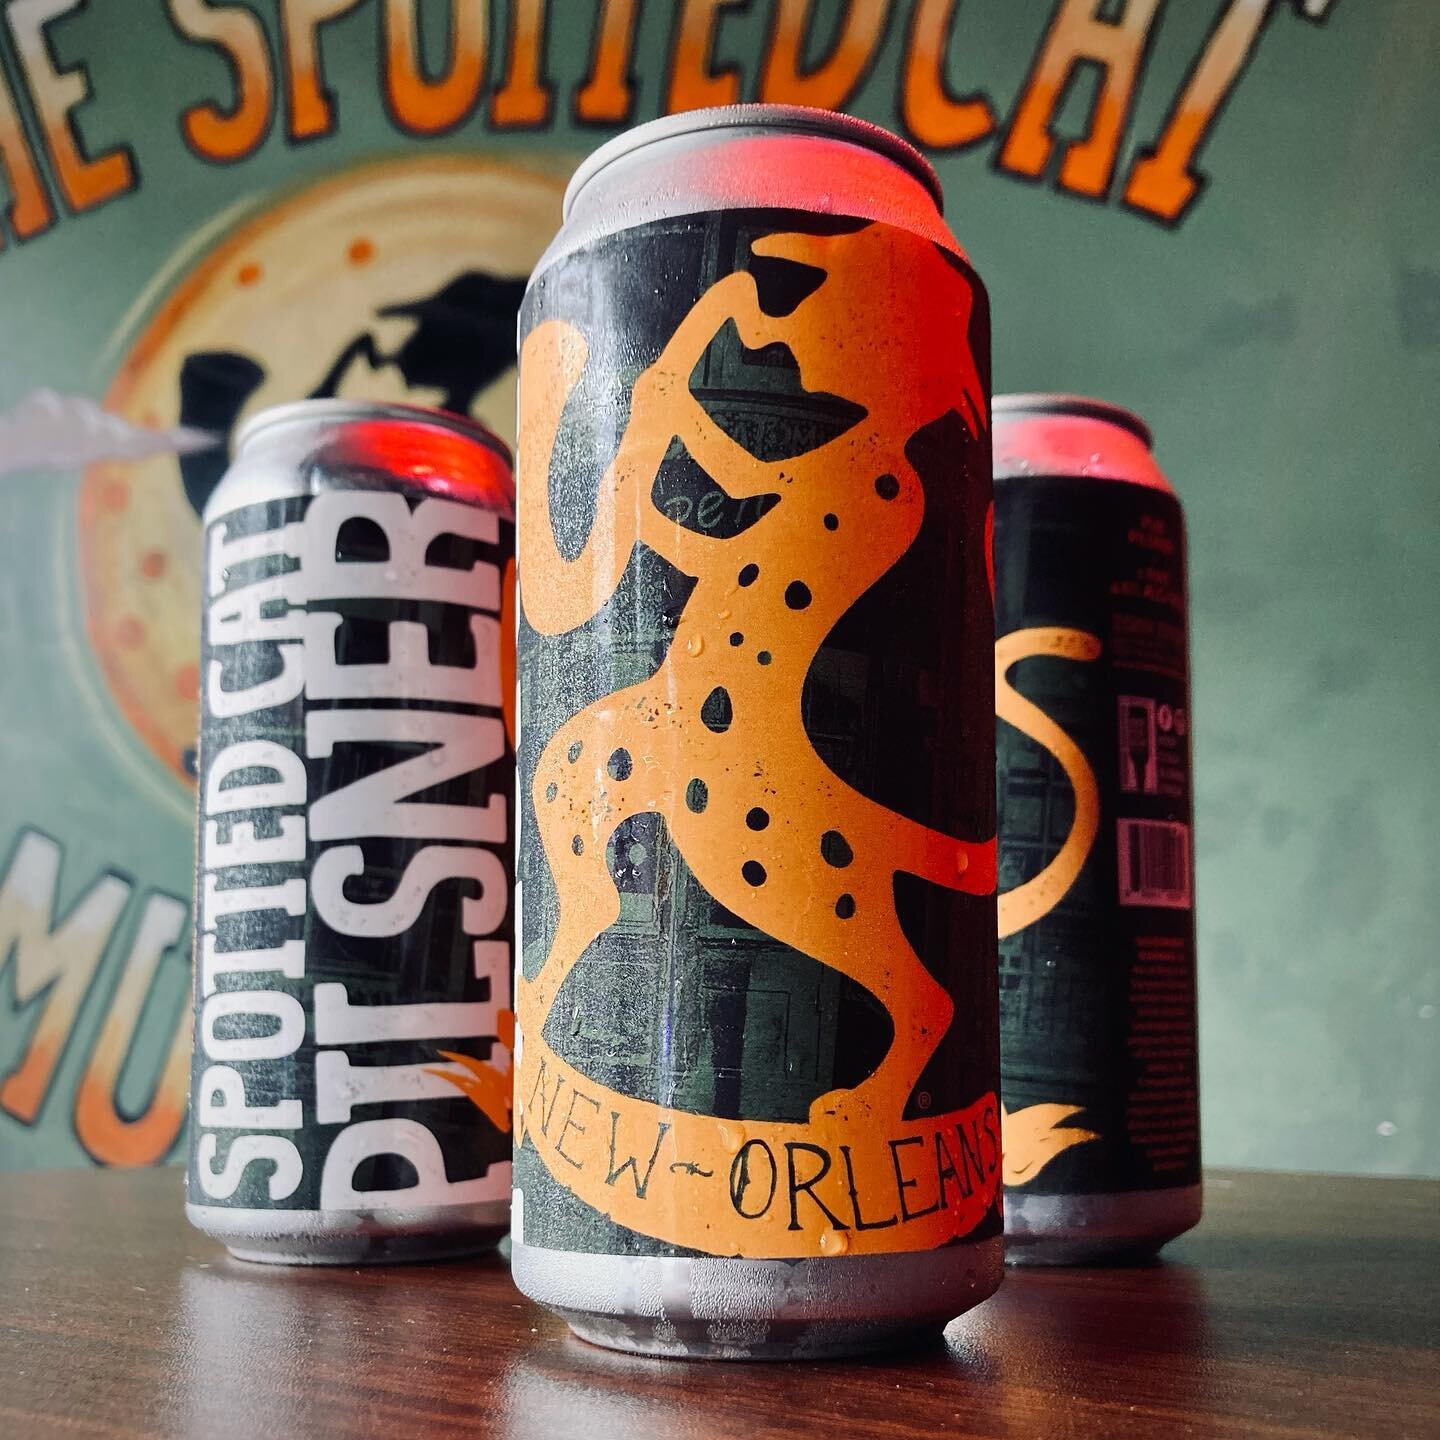 Added &lsquo;Beer Can Design&rsquo; to the portfolio&hellip; #spottedcatmusicclub